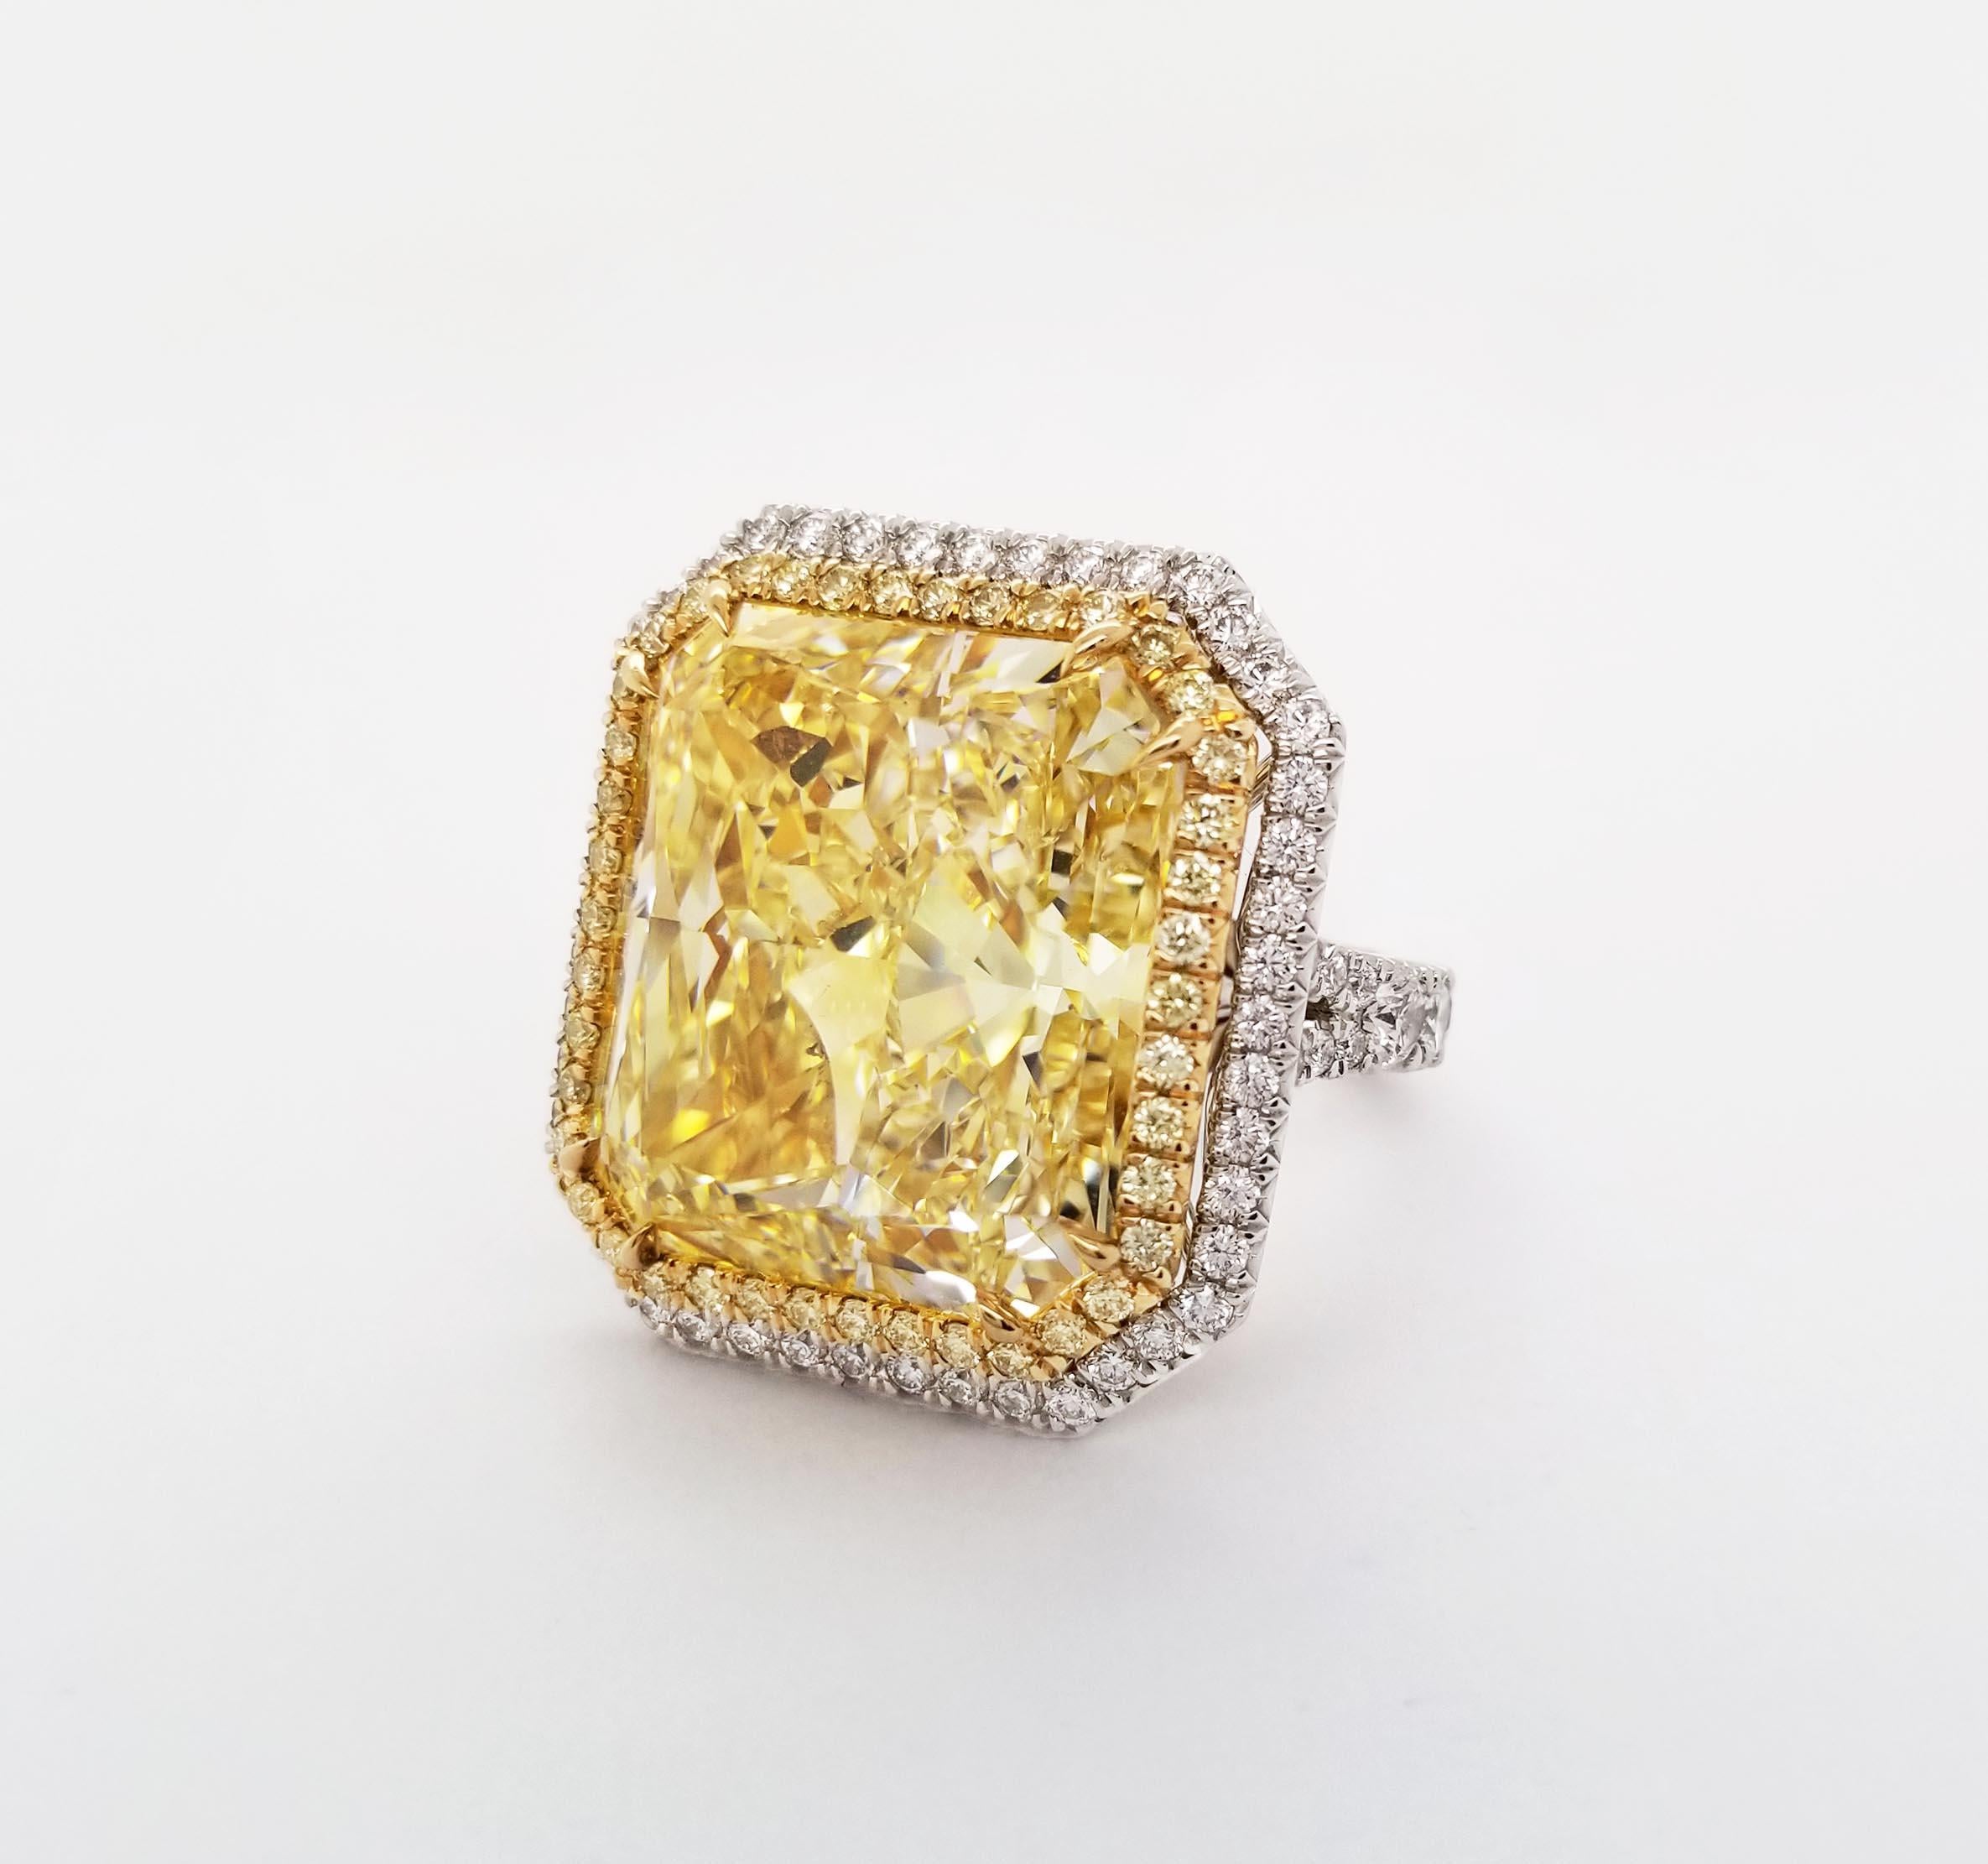 From SCARSELLI, a spectacular 24+ carat Fancy Yellow Natural Diamond set in an 18k gold hand-made setting perfectly finished all-around in platinum (see certificate pic for detailed stone's information). The center diamond is wrapped around by two